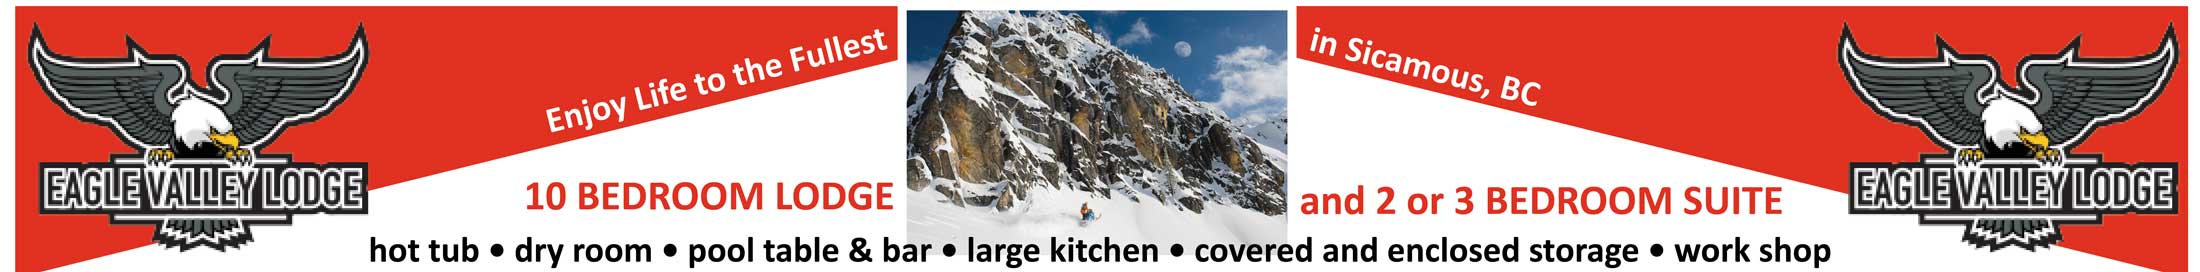 Eagle Valley Lodge Web Banner Ad